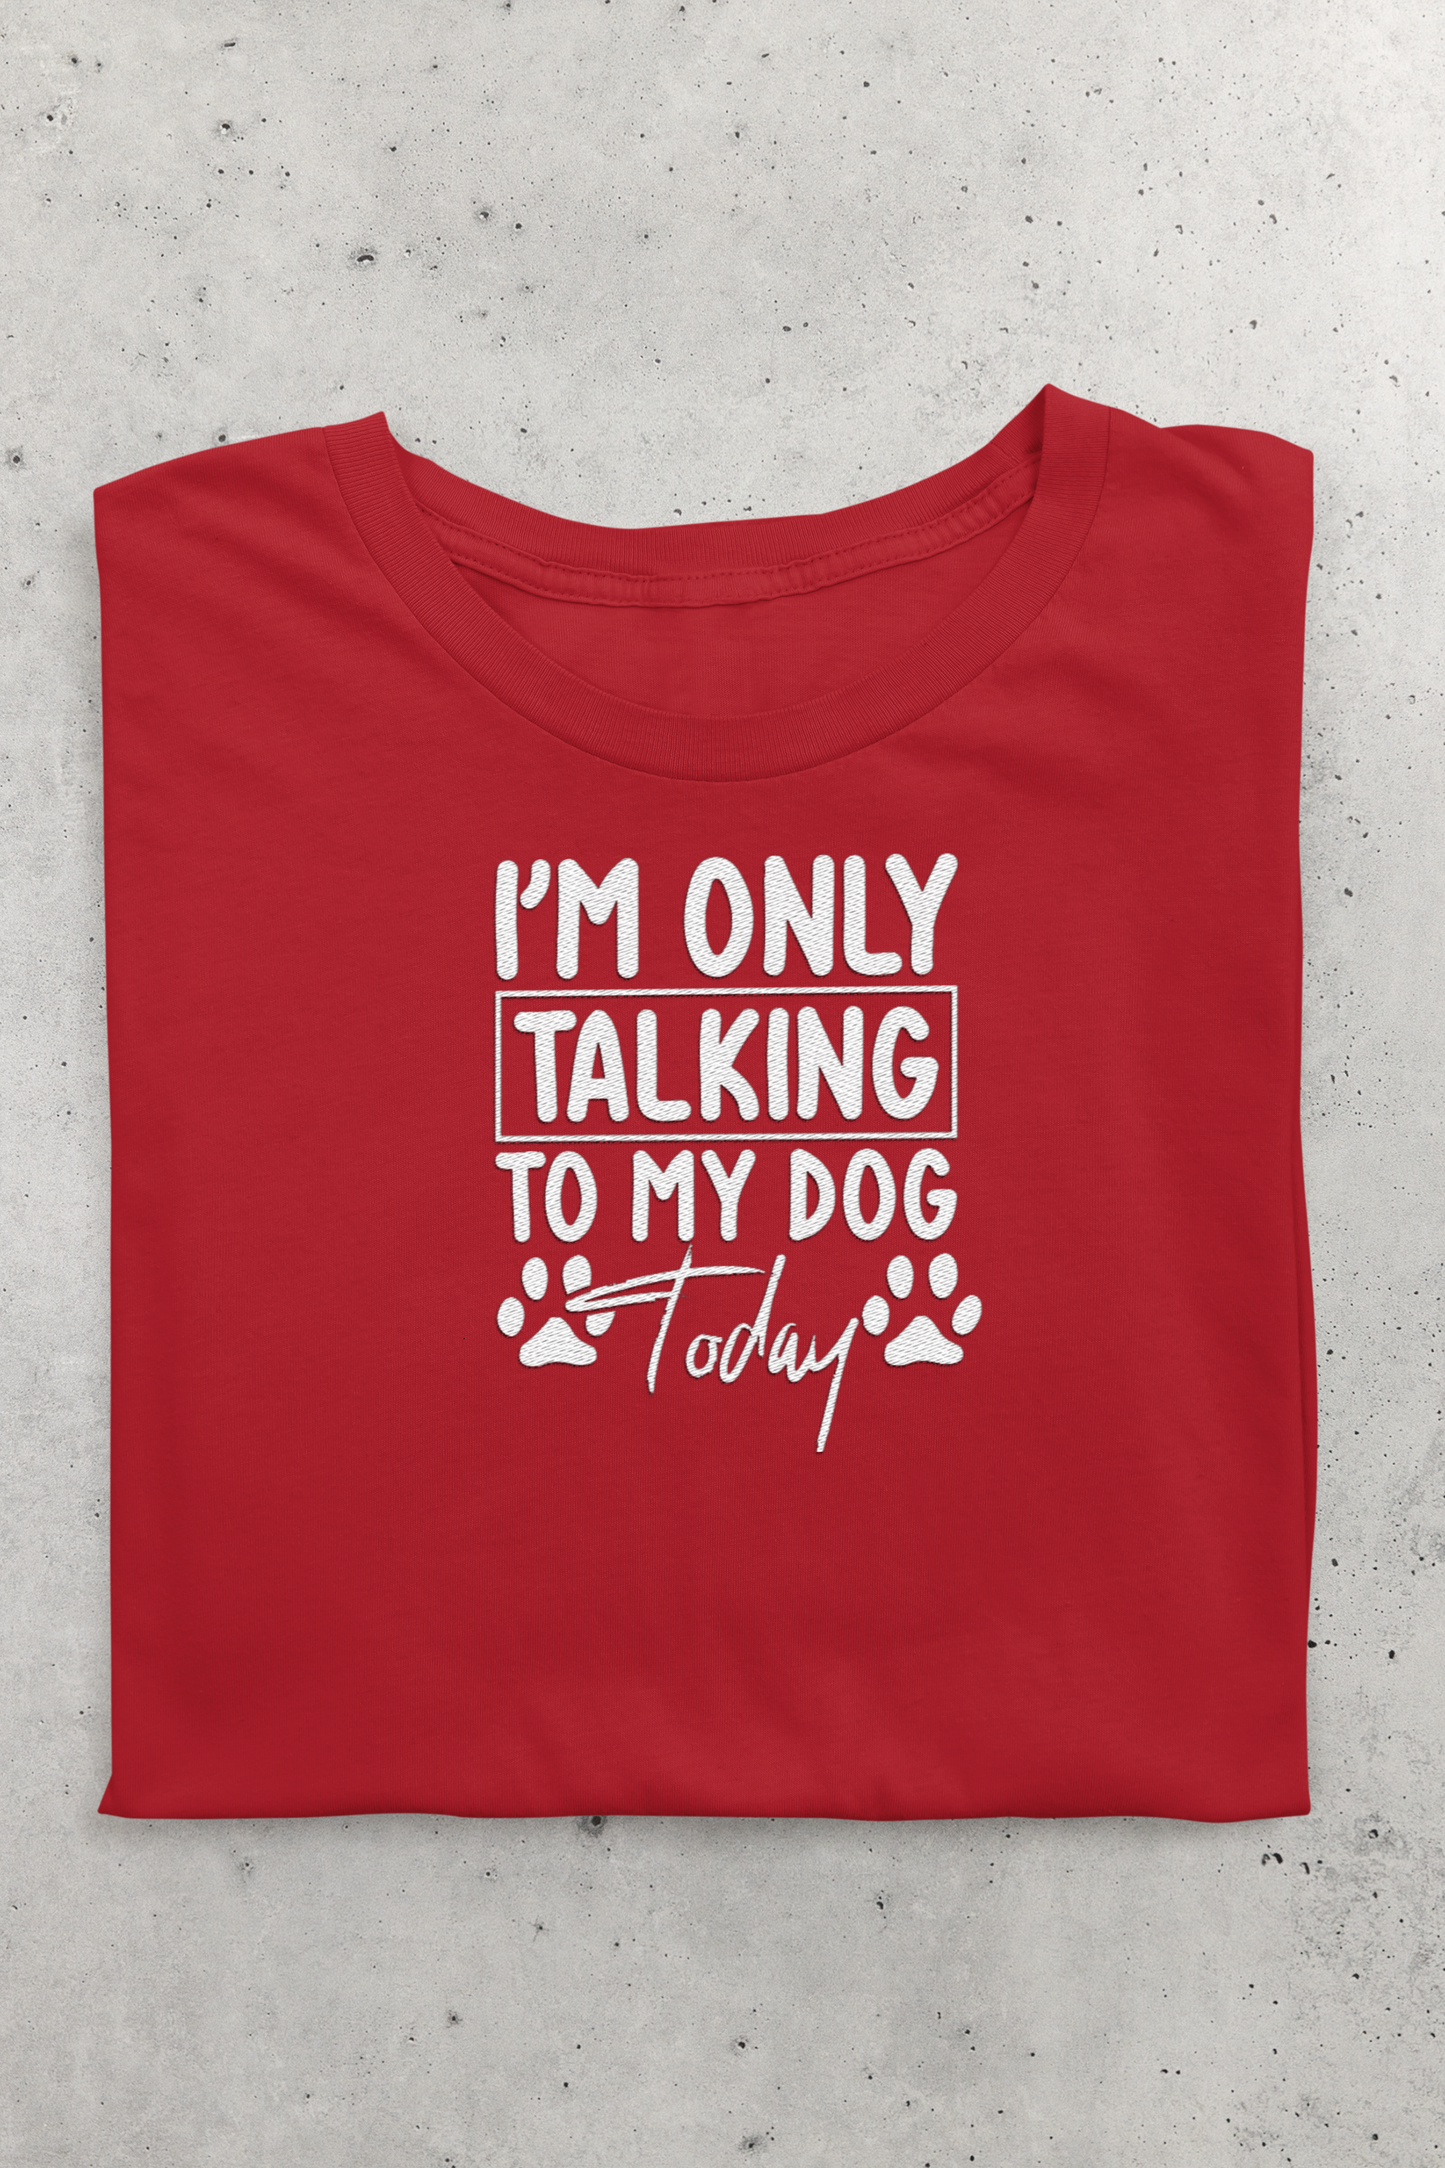 I'm only talking to my dog today crew neck